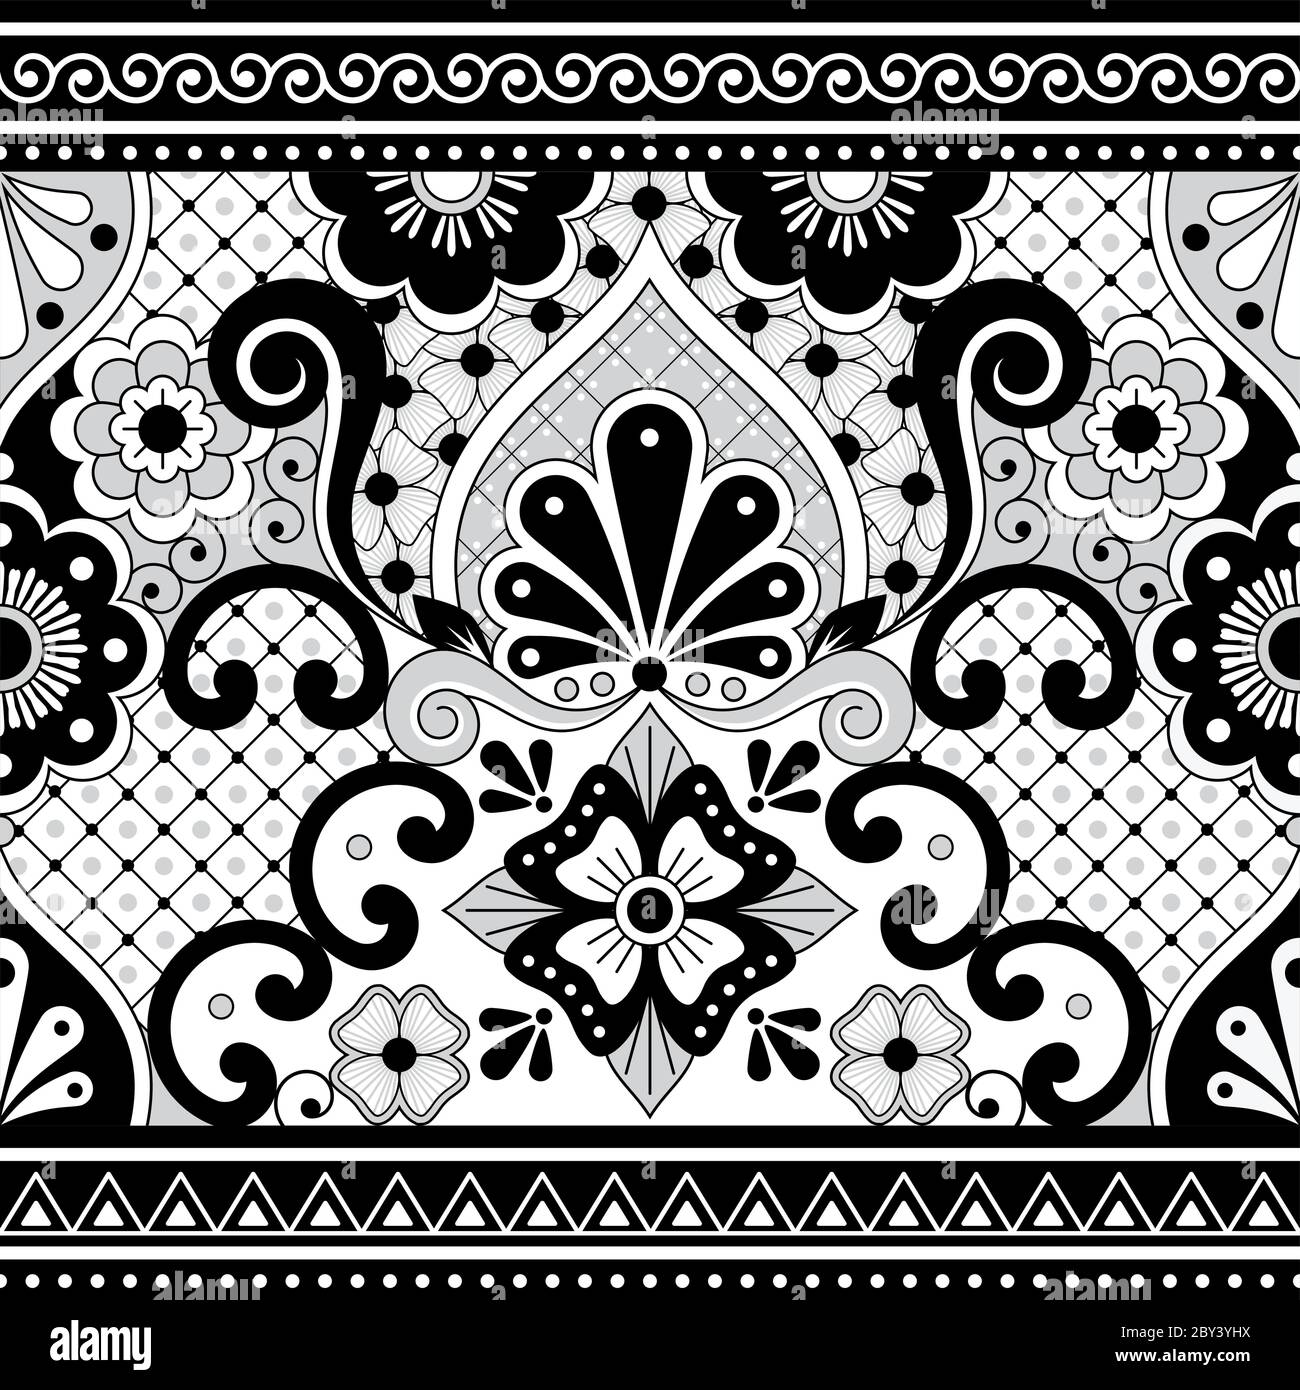 Mexican Talavera Poblana vector seamless pattern, repetitive background inspired by traditional pottery and ceramics design from Mexico in black and w Stock Vector